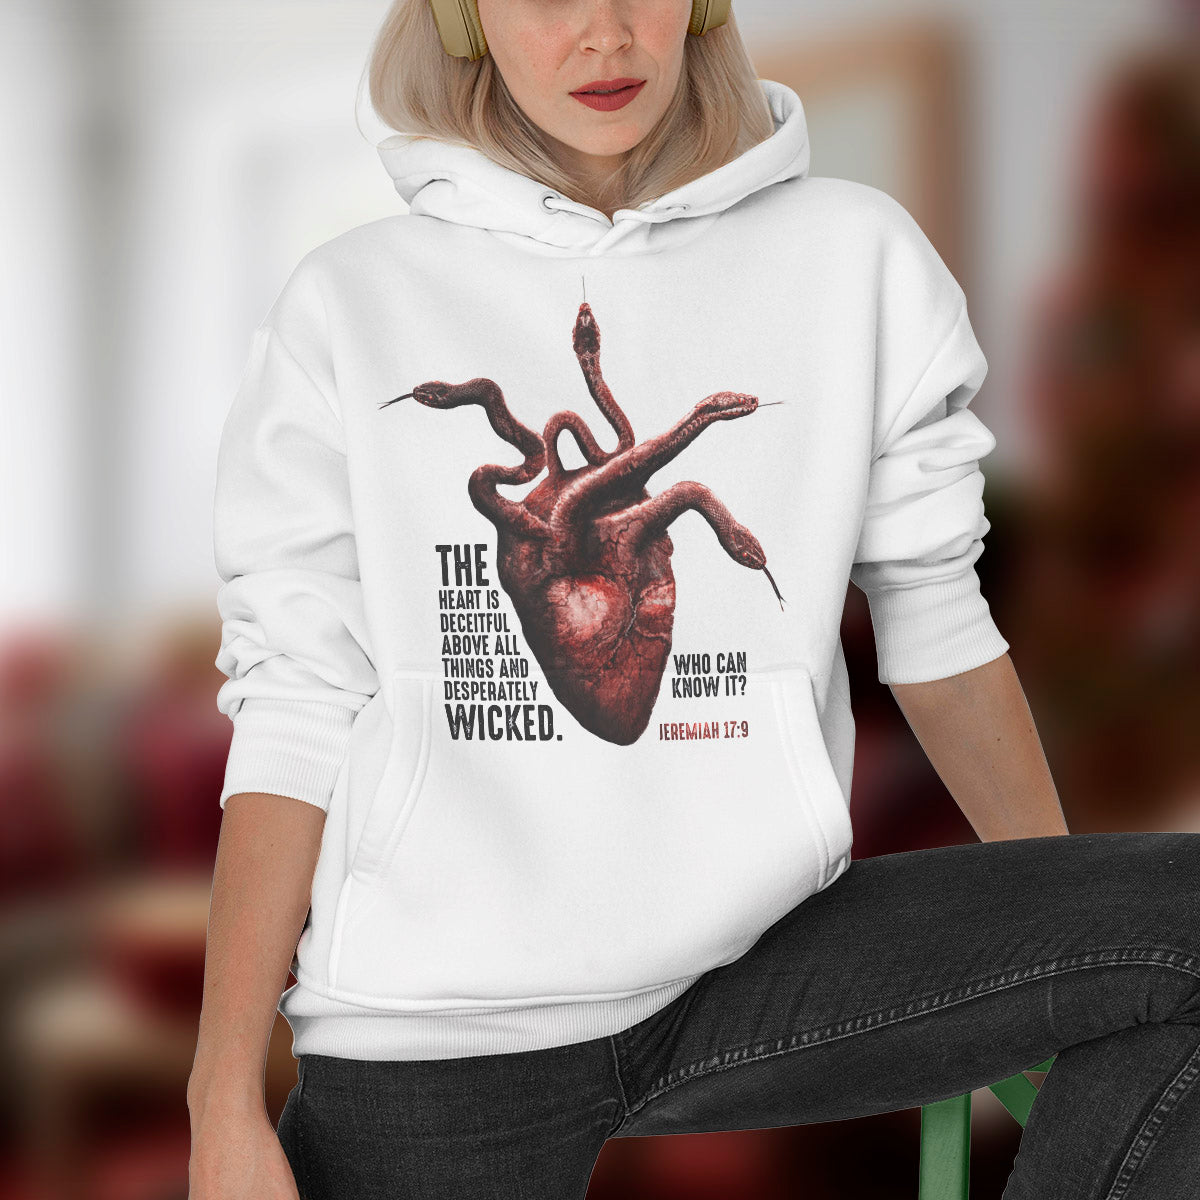 The Heart Is Deceitful Above All Things, And Desperately Wicked Jeremiah 17 9 Lover Jesus 3d Hoodie - Christian 3d Sweatshirt